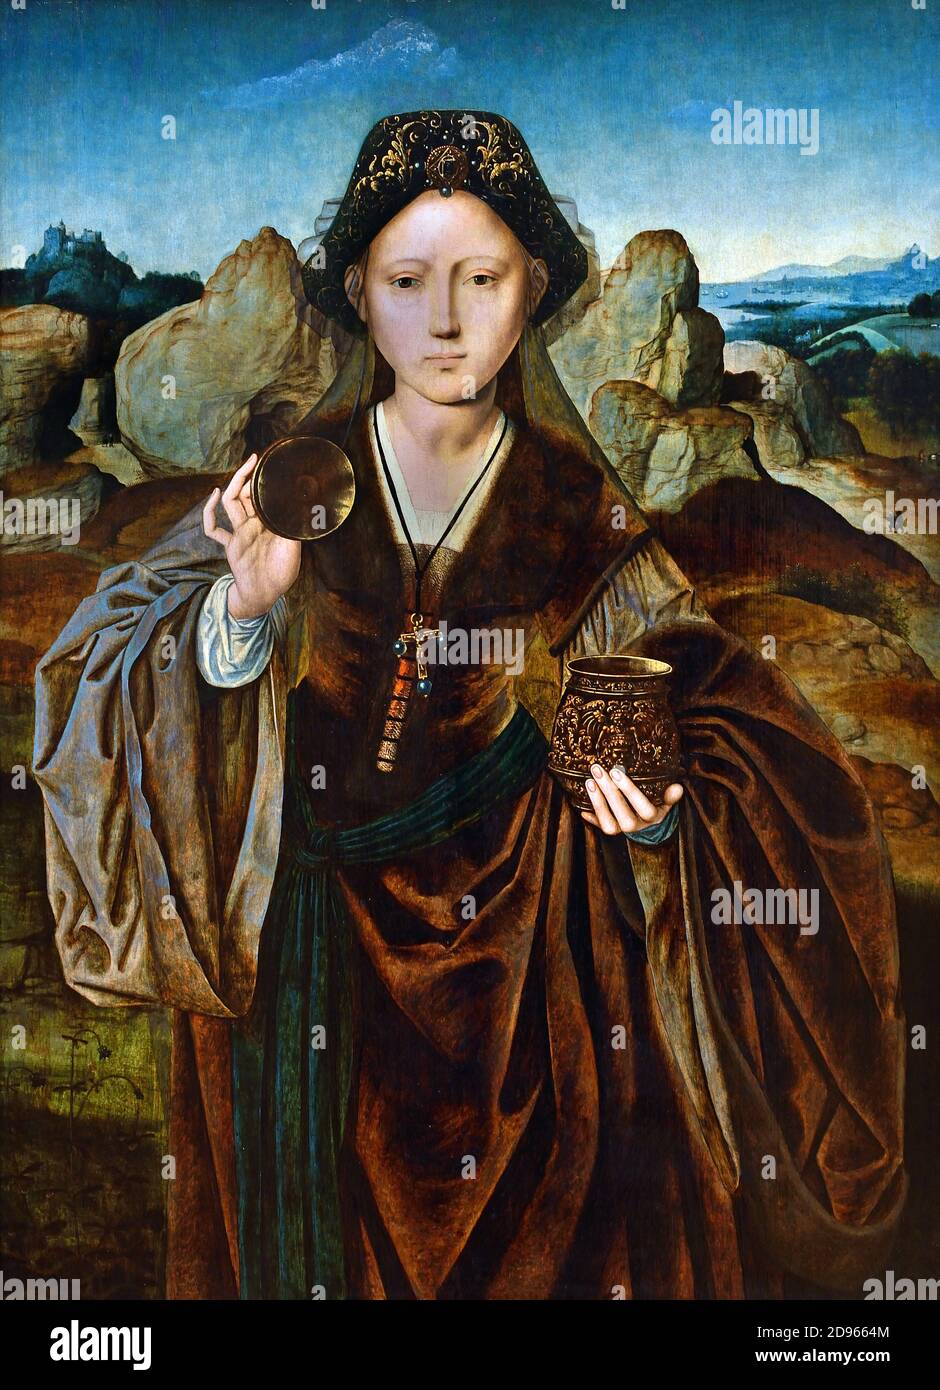 Saint Mary Magdalene 1525 by Master of Mary Magdalene Antwerp,    Belgian, Belgium, Flemish, ( Mary Magdalene, travelled with Jesus as one of his followers and was a witness to his crucifixion and its aftermath. ) Stock Photo